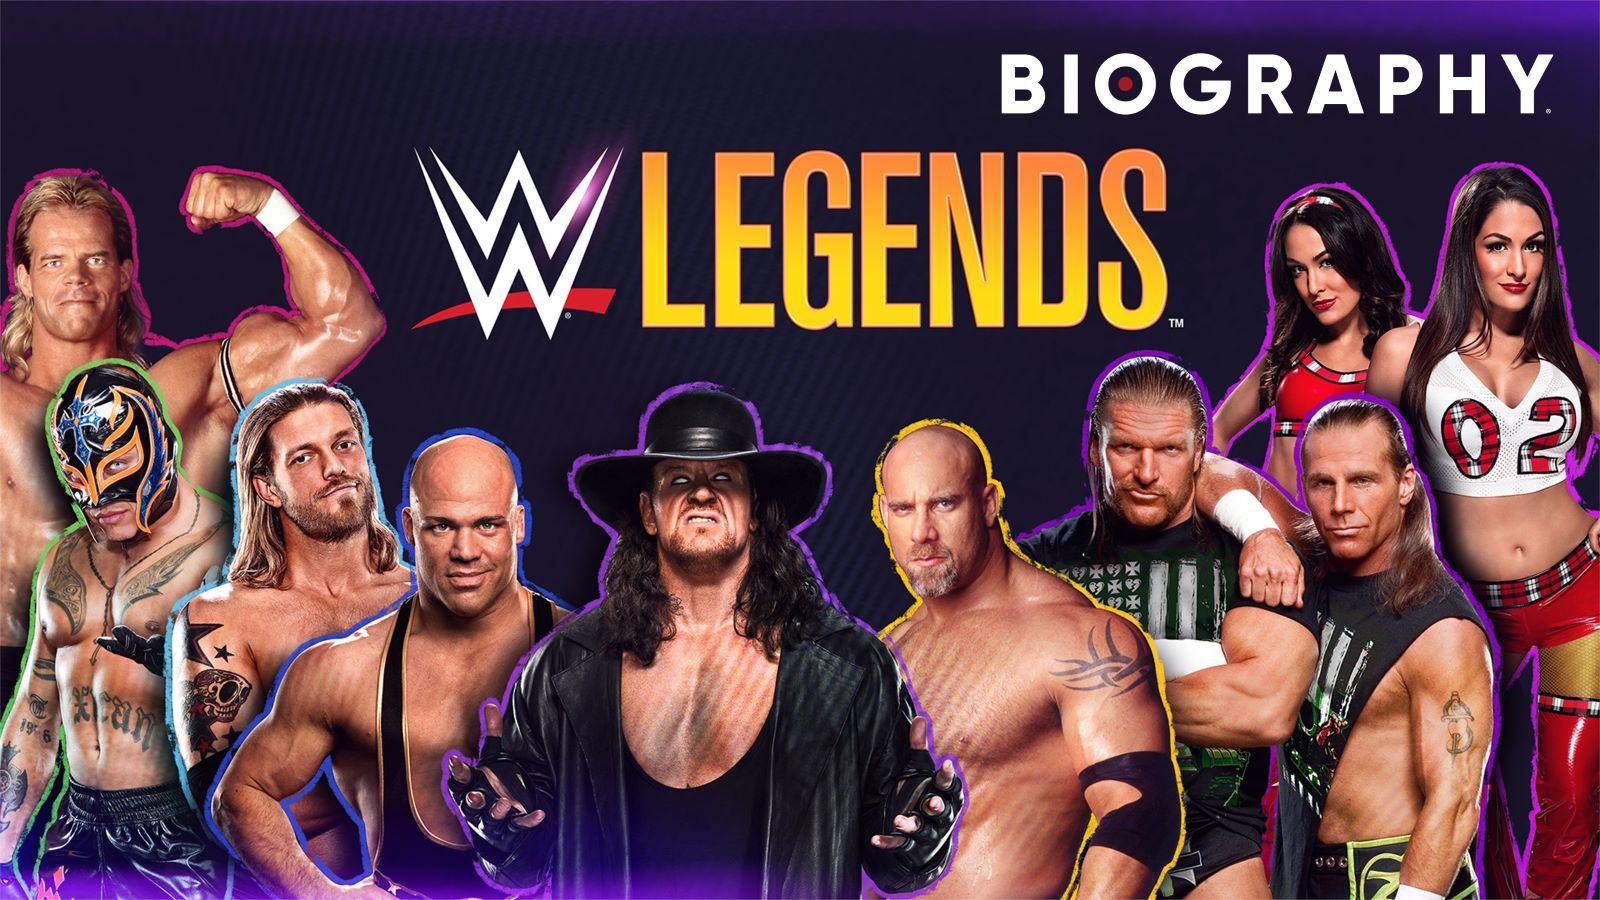 biography wwe legends season 3 how many episodes